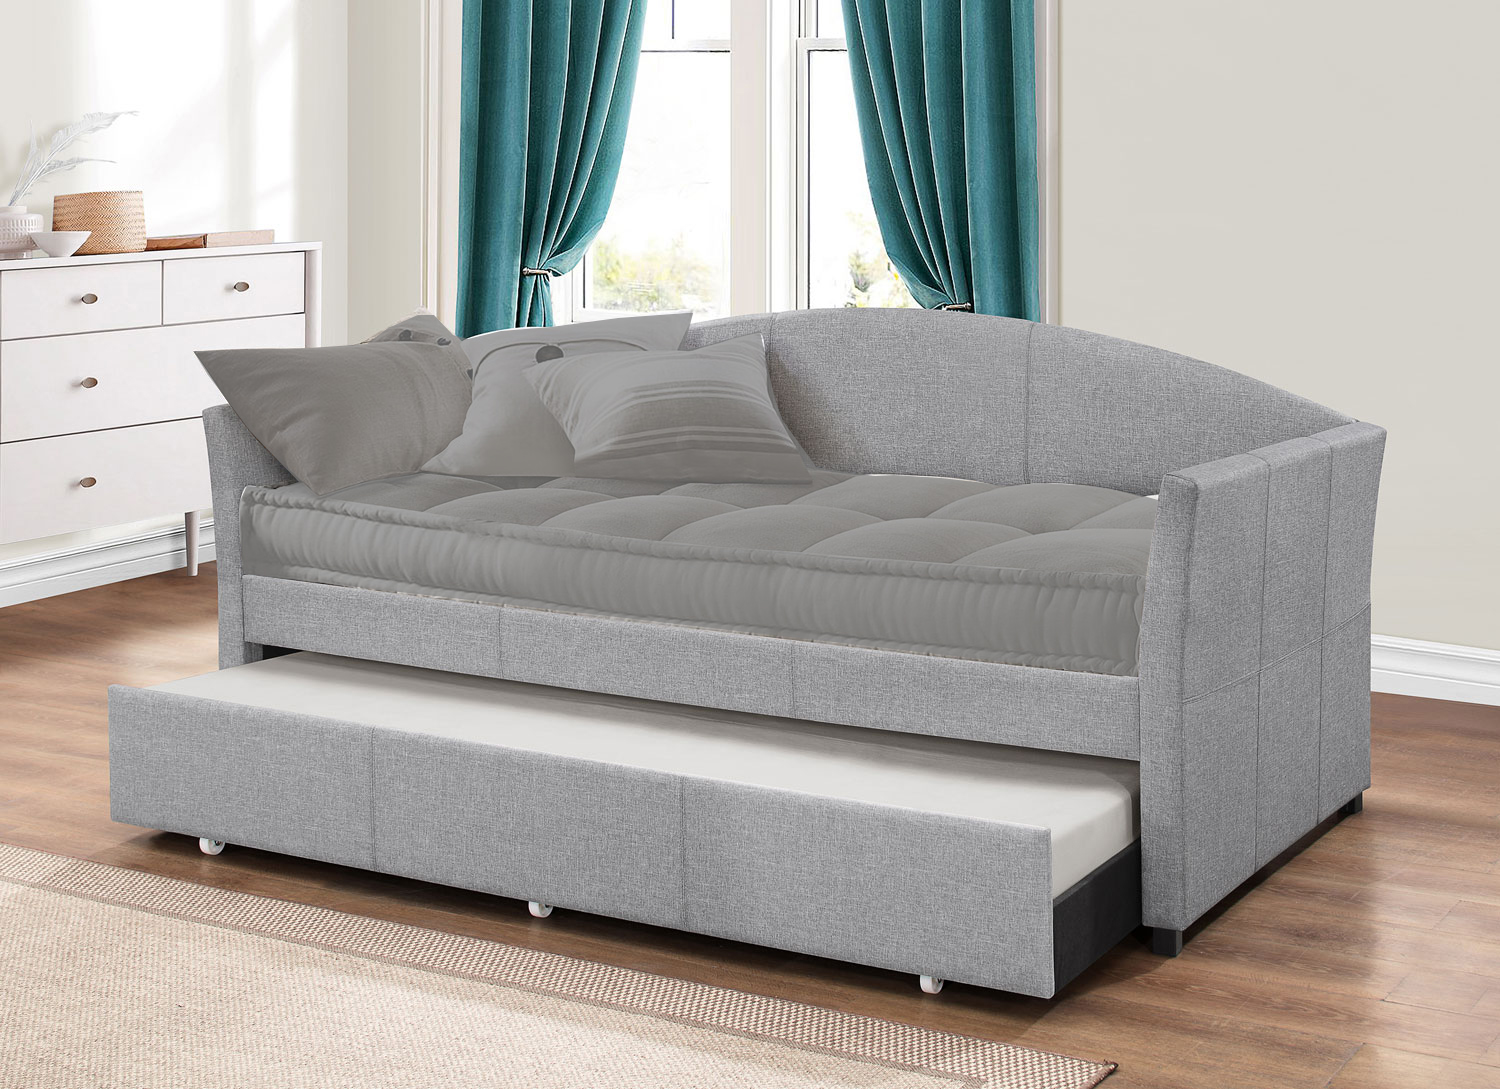 Hillsdale Westchester Daybed with Trundle - Smoke Gray